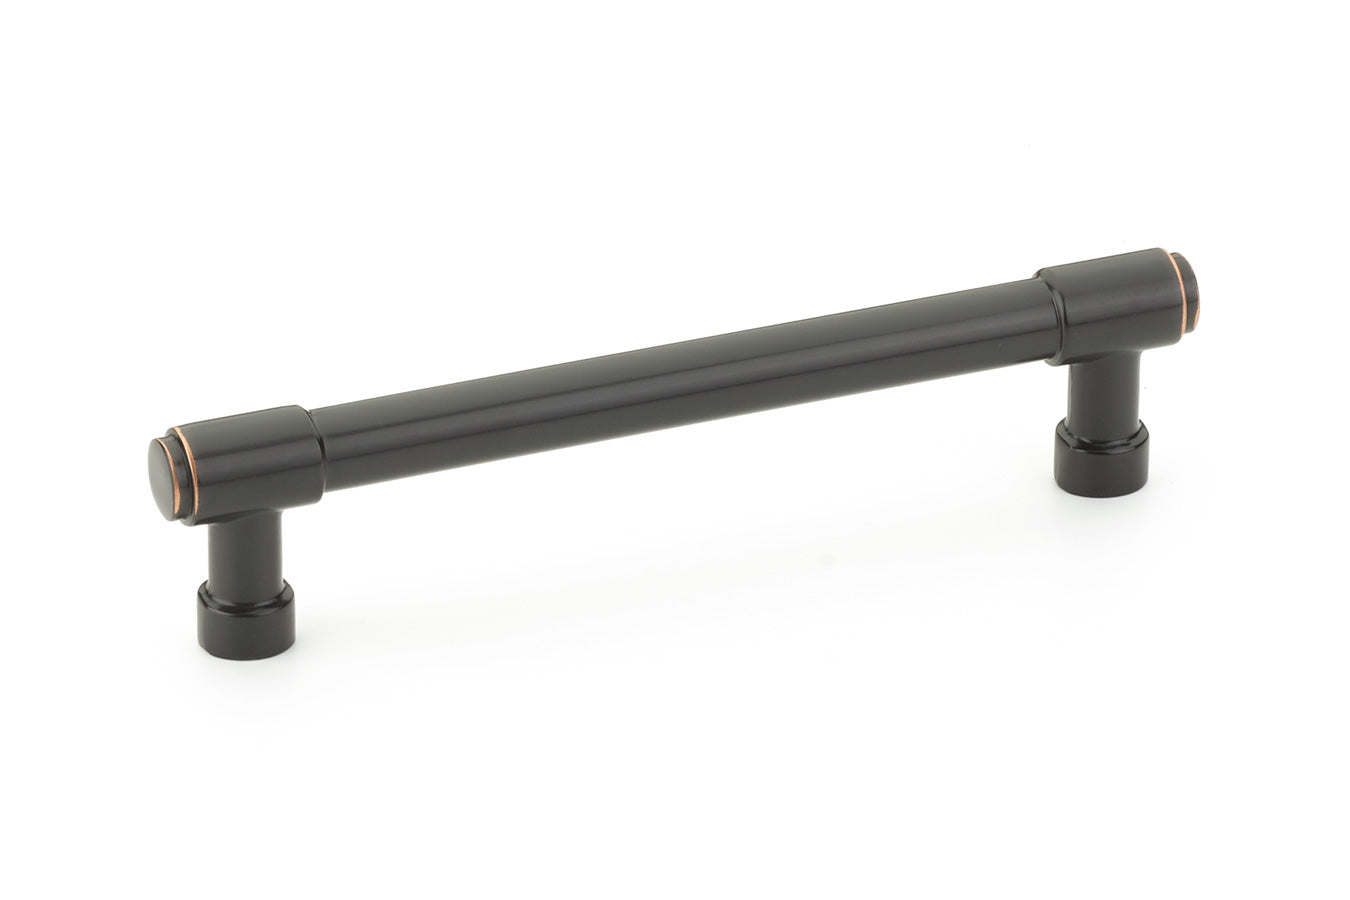 Oil Rubbed Bronze "Industry" Cabinet Knobs and Drawer Pulls - Industry Hardware